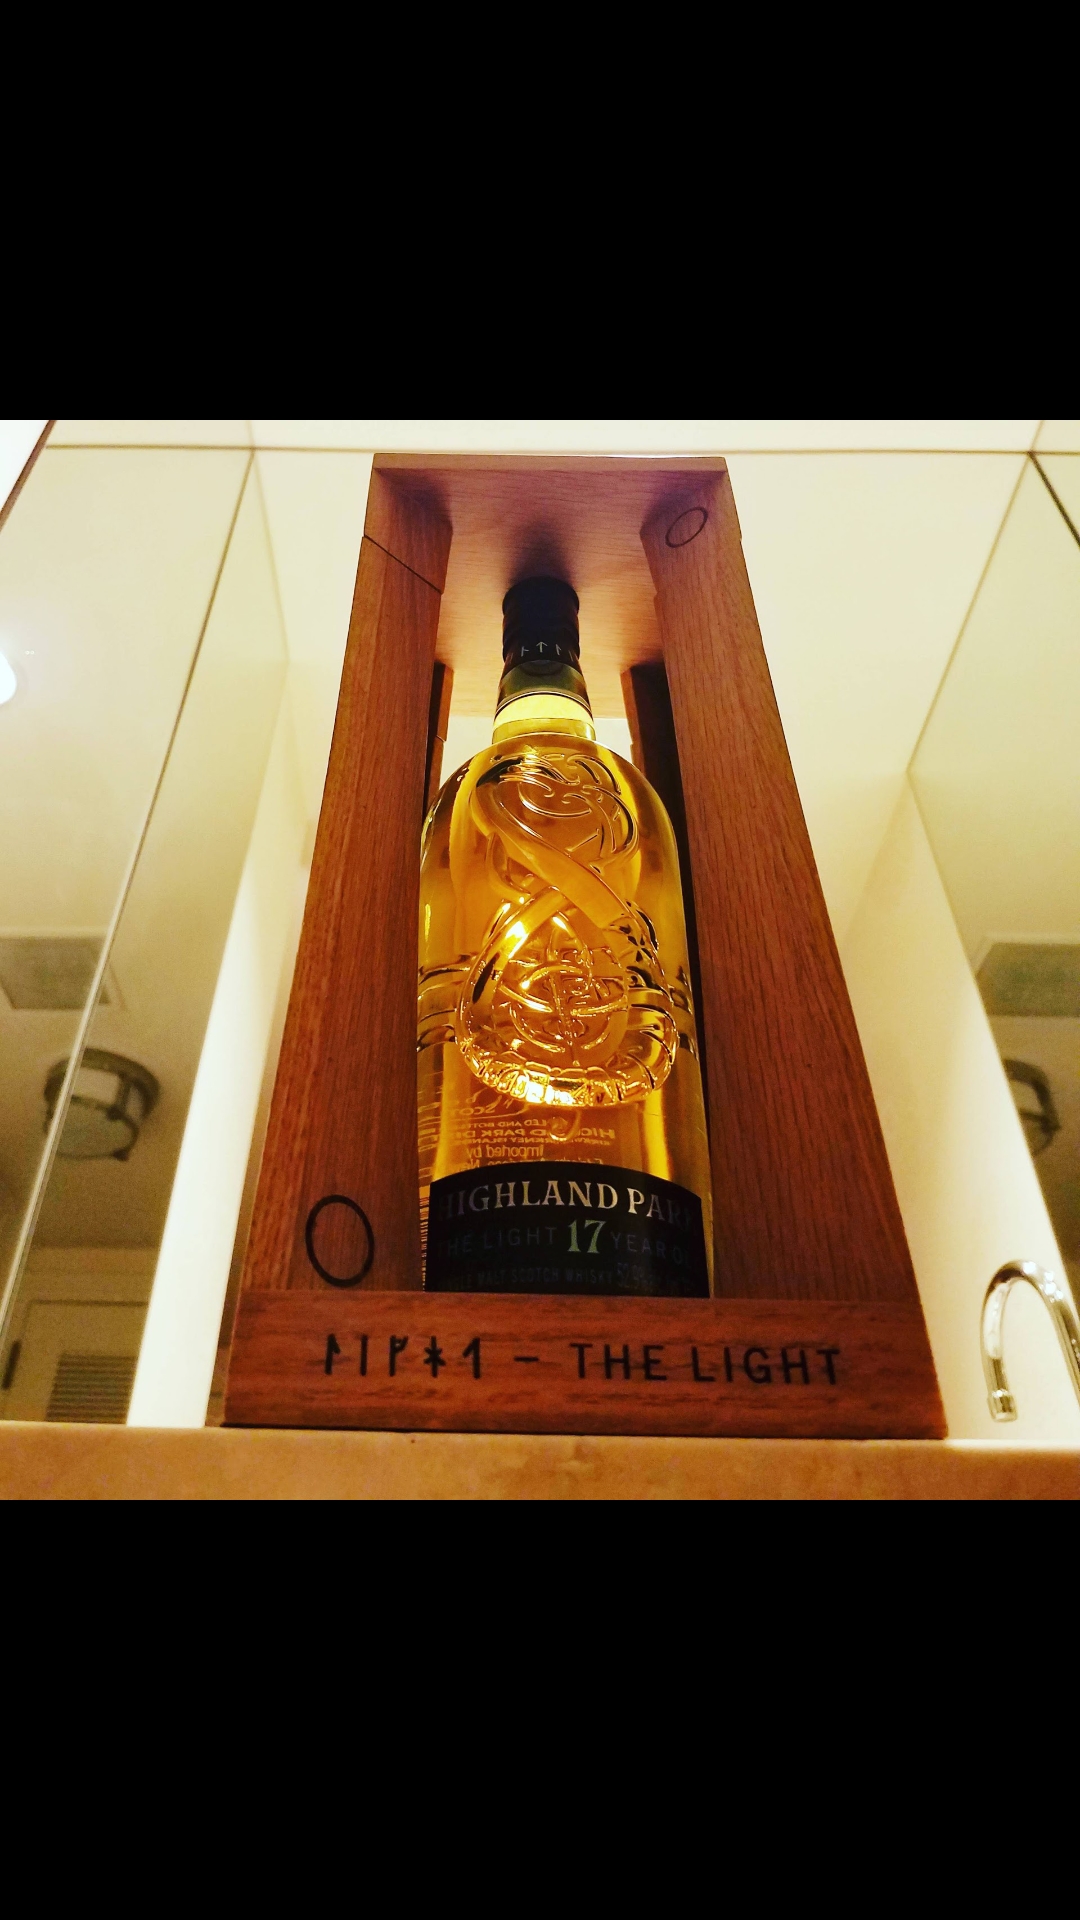 Read more about the article Highland Park 17 year The Light: JAWS Rating 9.2/10​